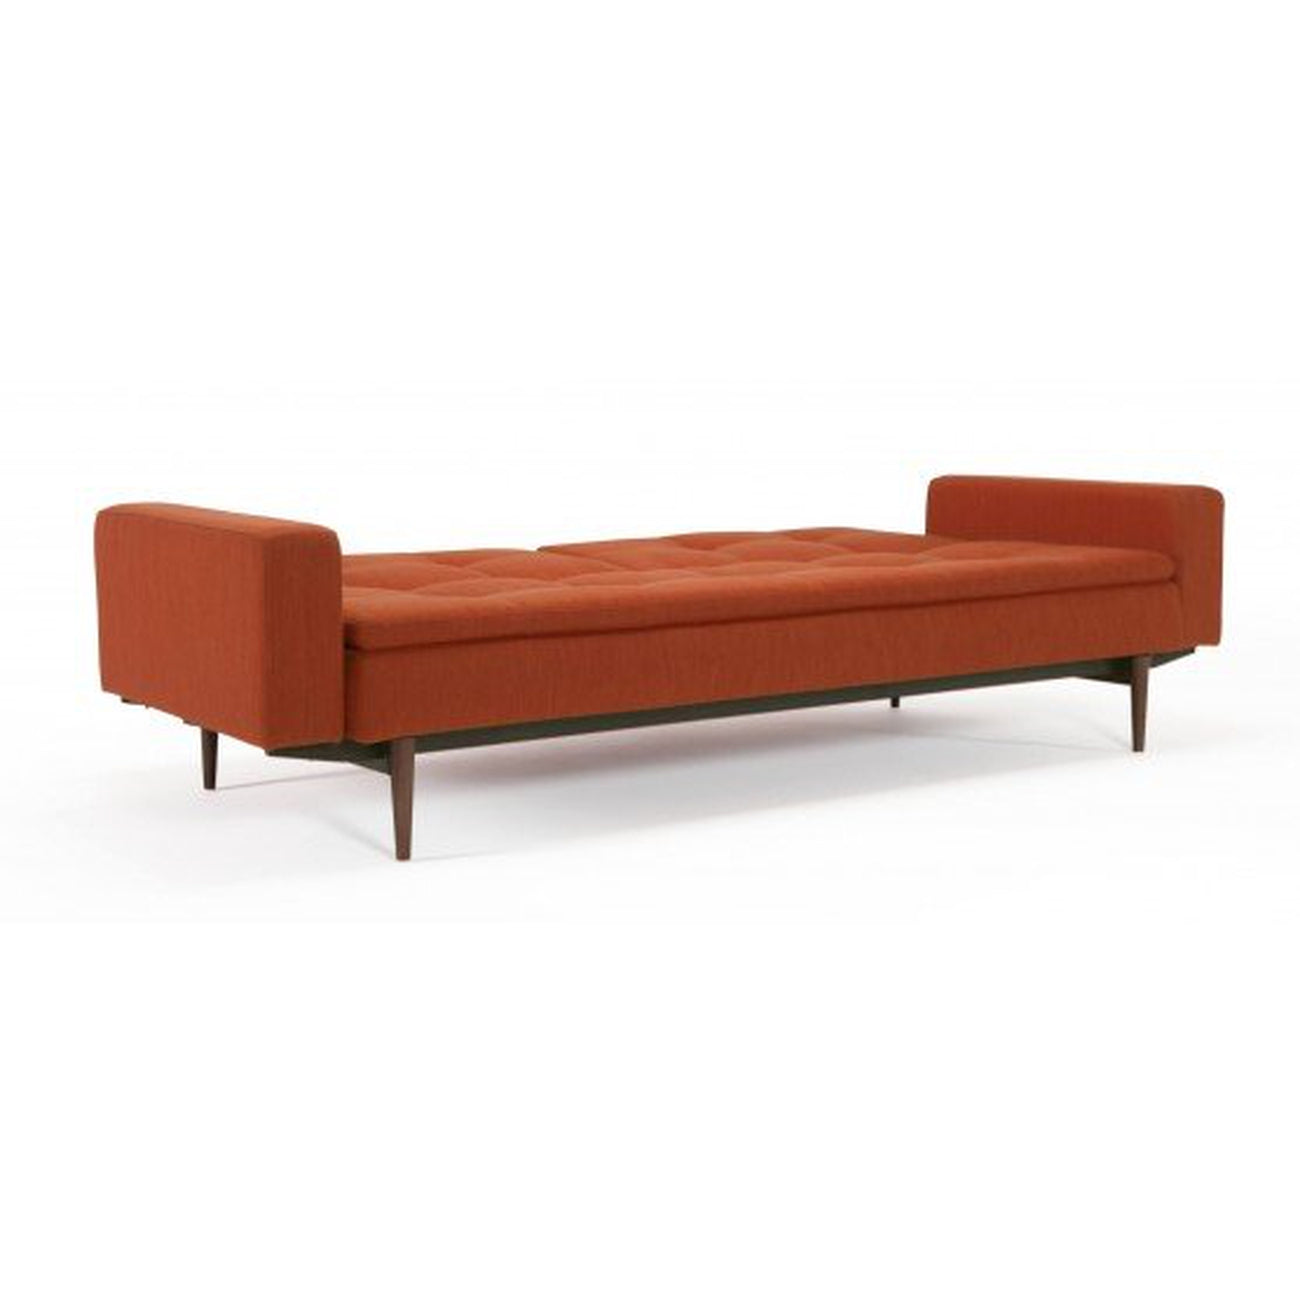 Dublexo Deluxe Sofa W/Arms,DARK WOOD-Innovation Living-INNO-94-741050020527-10-3-SofasMixed Dance Natural-6-France and Son